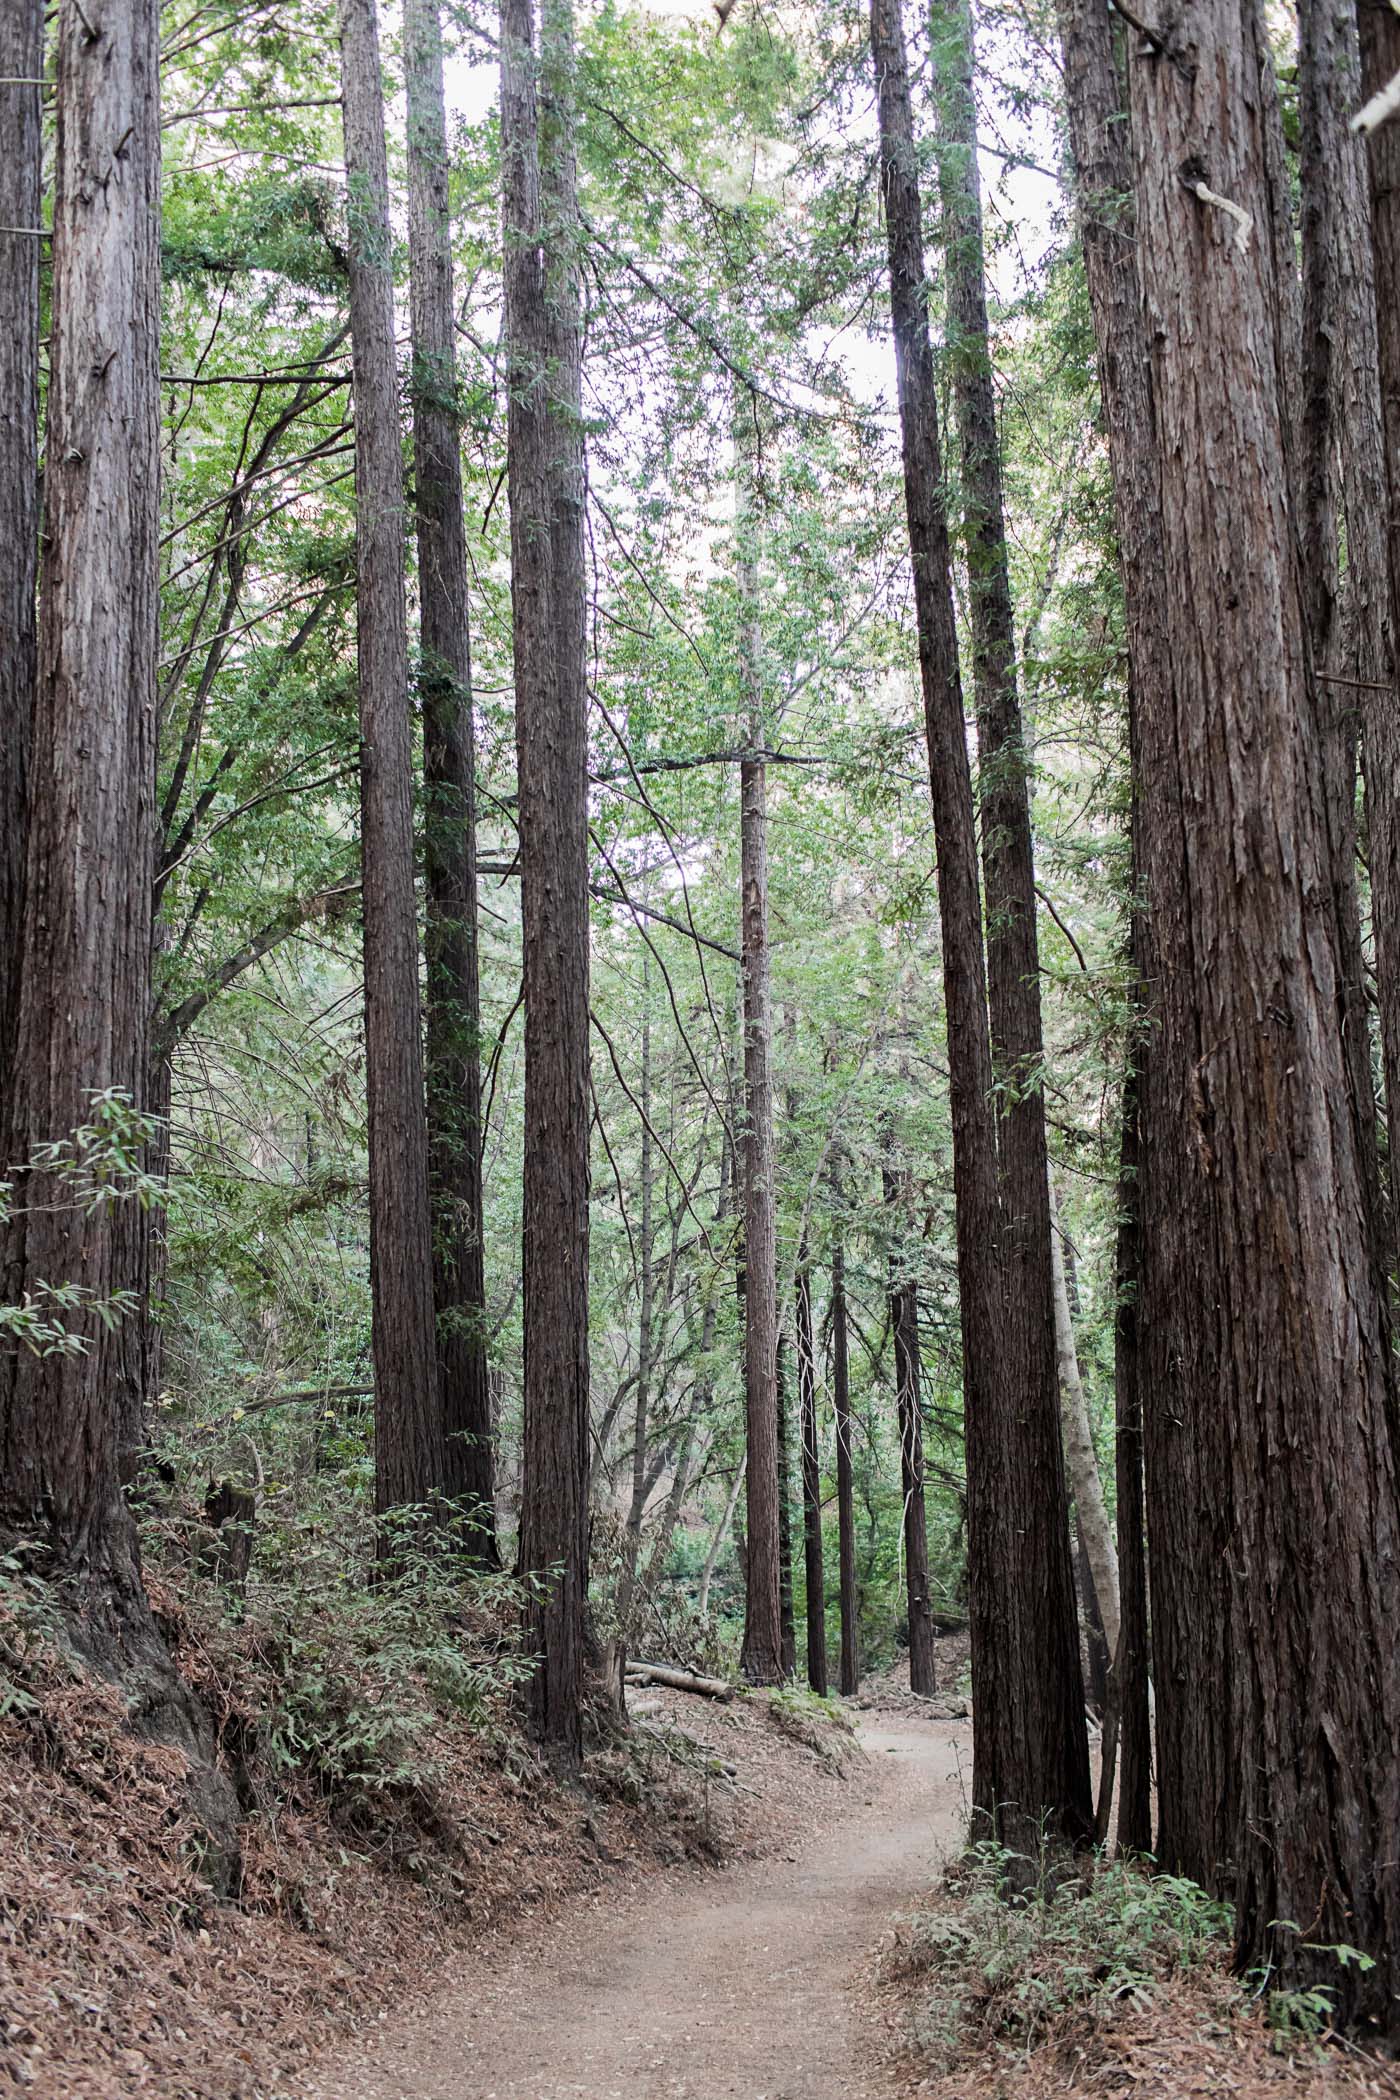 Hiking Through California at Wunderlich Park in Woodside, California.